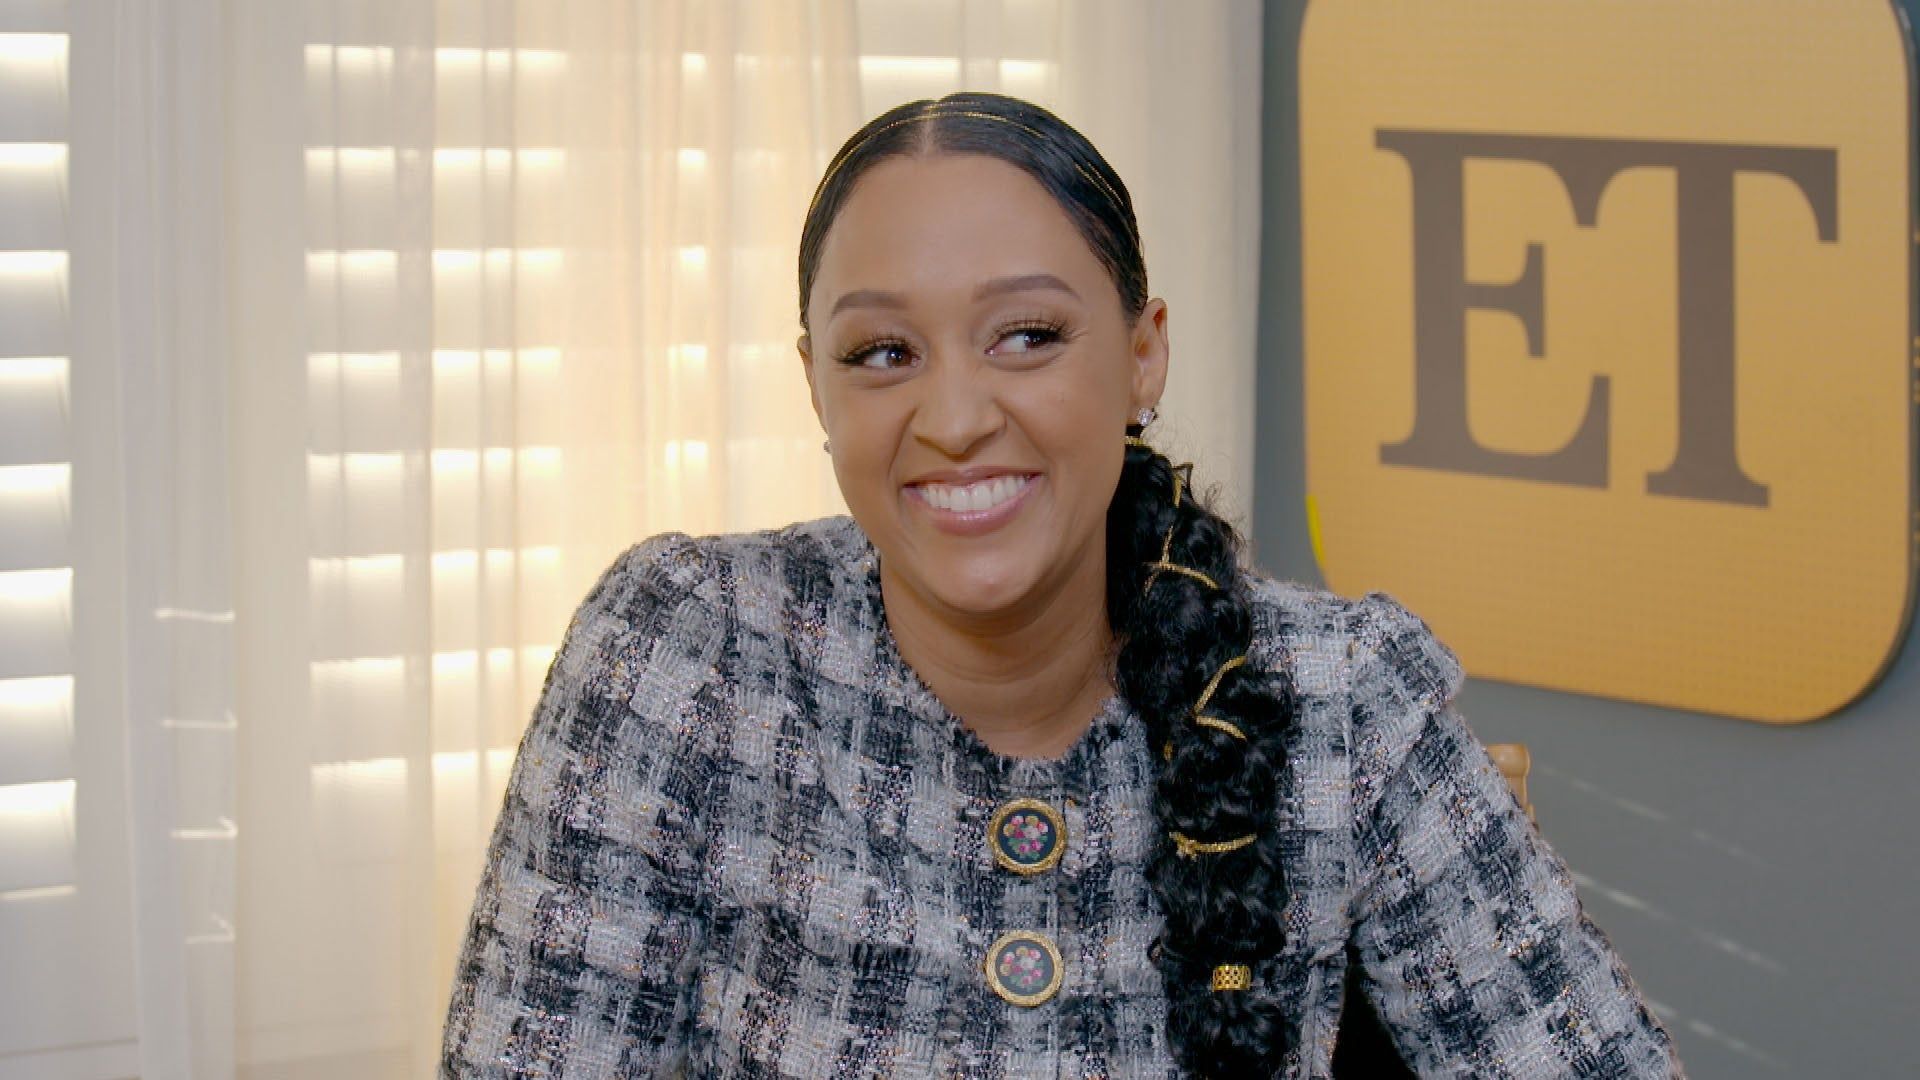 Tia & Tamera Mowry 'Always' Discuss Working Together Again - But Not on a 'Sister, Sister' Reboot (Exclusive)